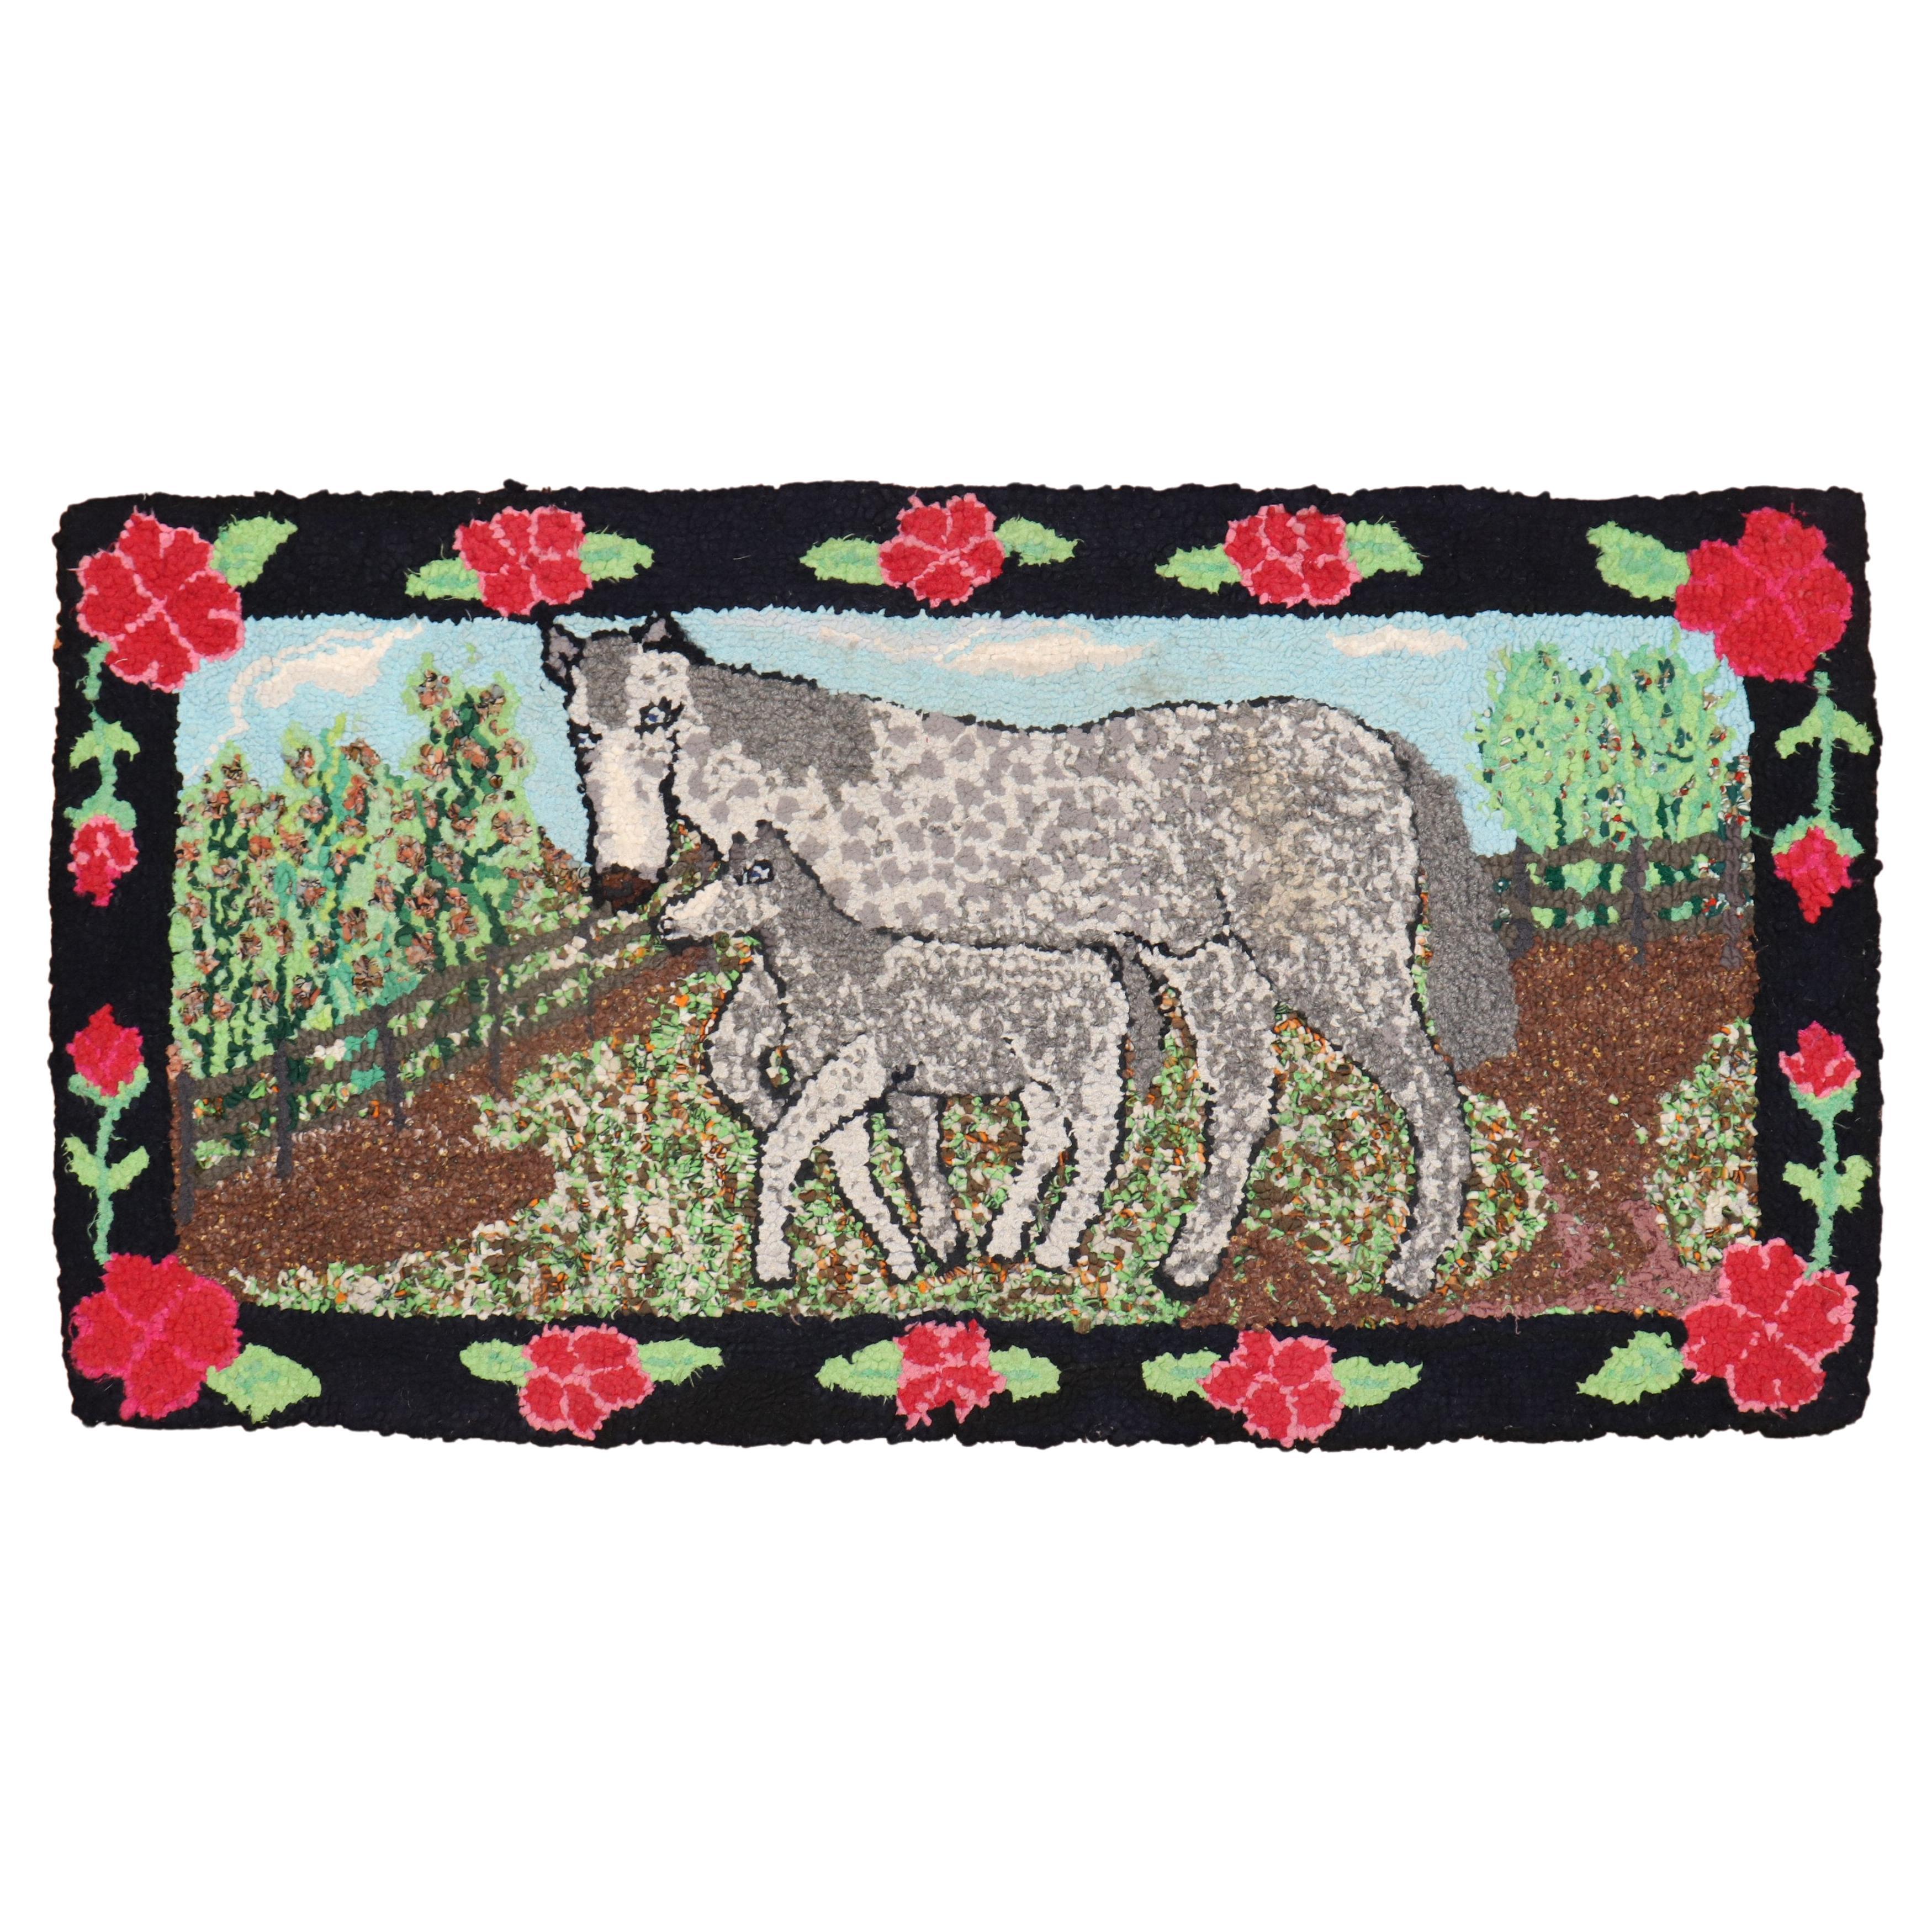 American Hooked Pictorial Throw Rug